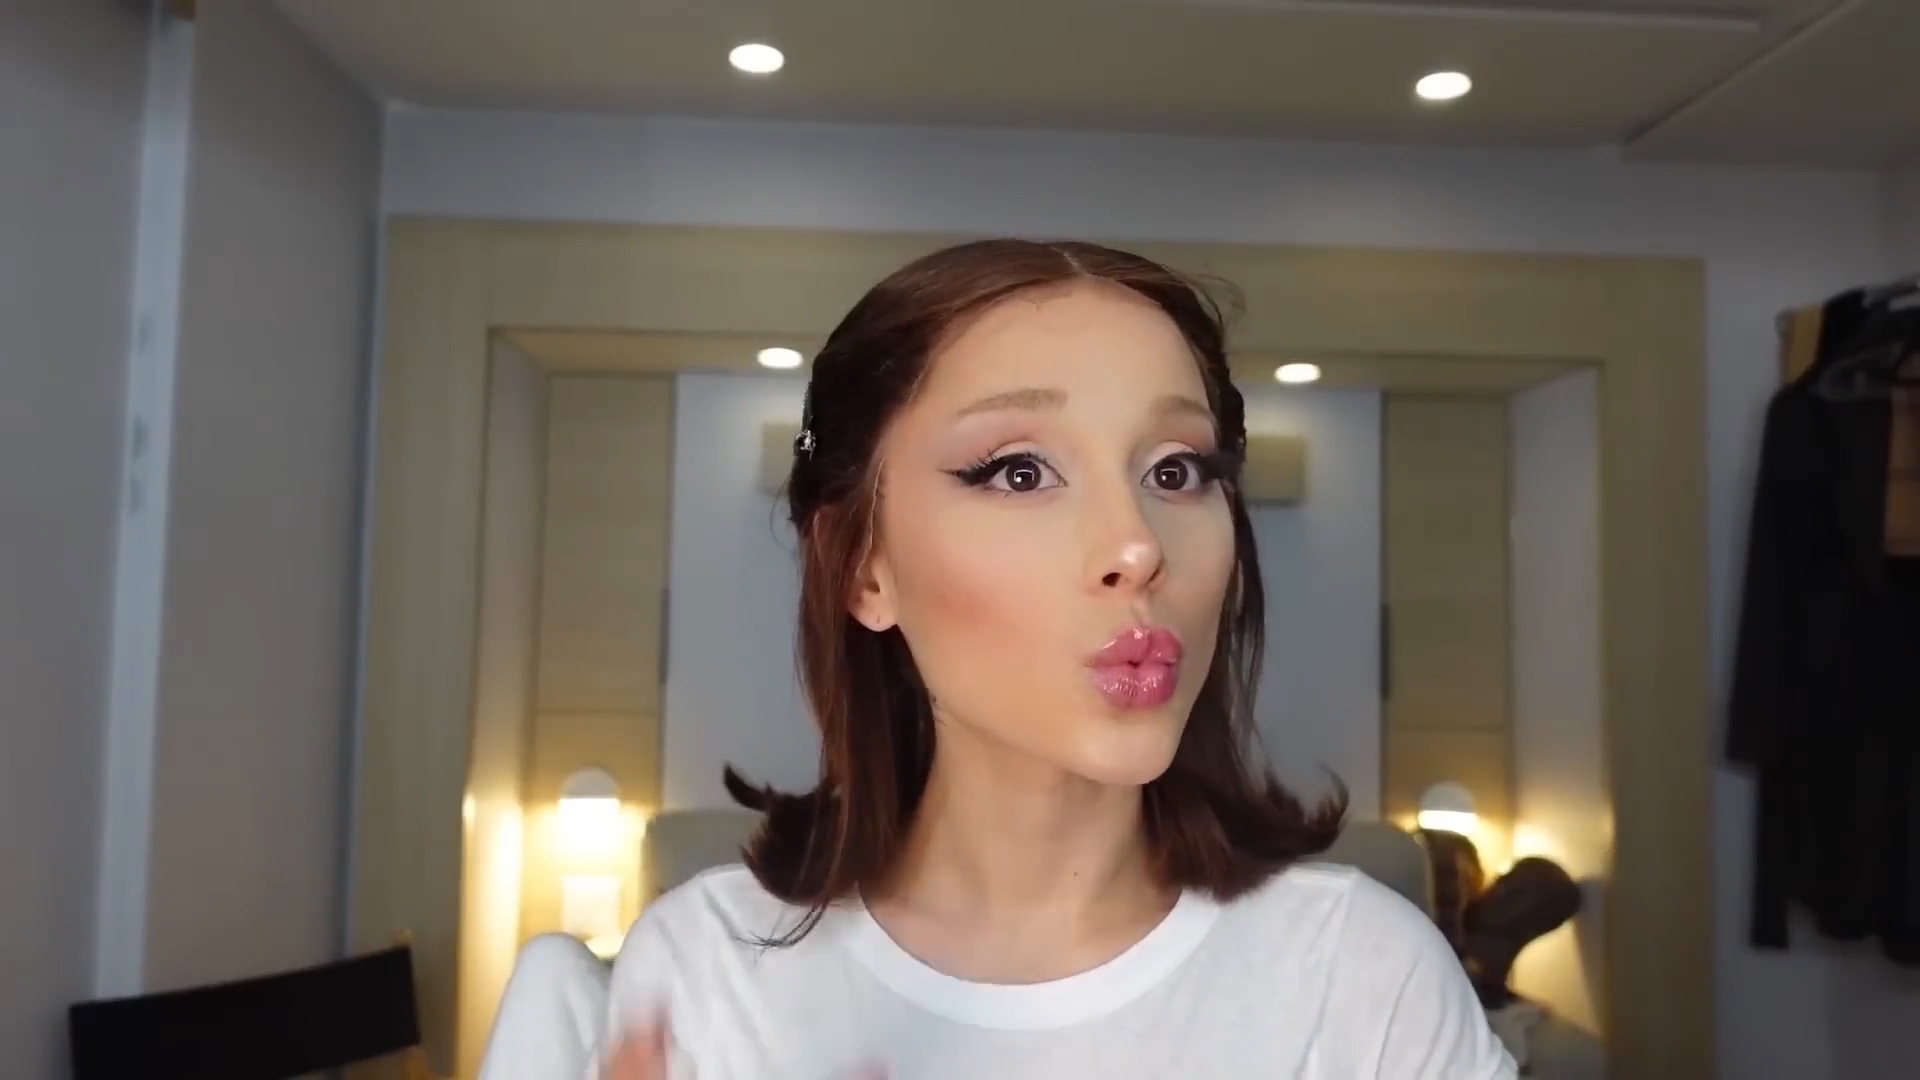 Fans gushed over how 'talented' Ariana was at makeup, and were stunned she did her own glam